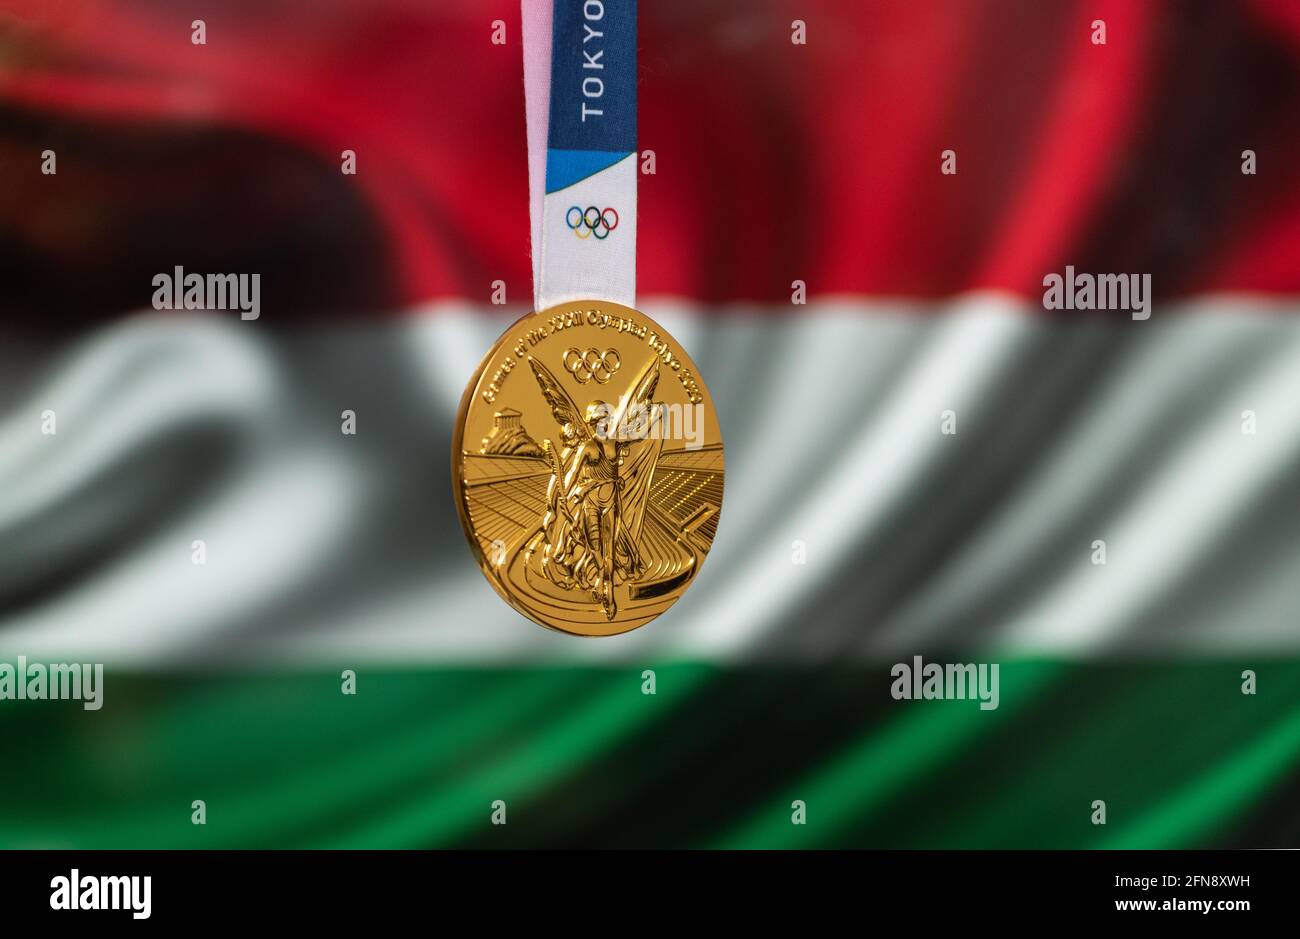 April 25, 2021 Tokyo, Japan. Gold medal of the XXXII Summer Olympic Games 2020 in Tokyo on the background of the flag of Hungary. Stock Photo